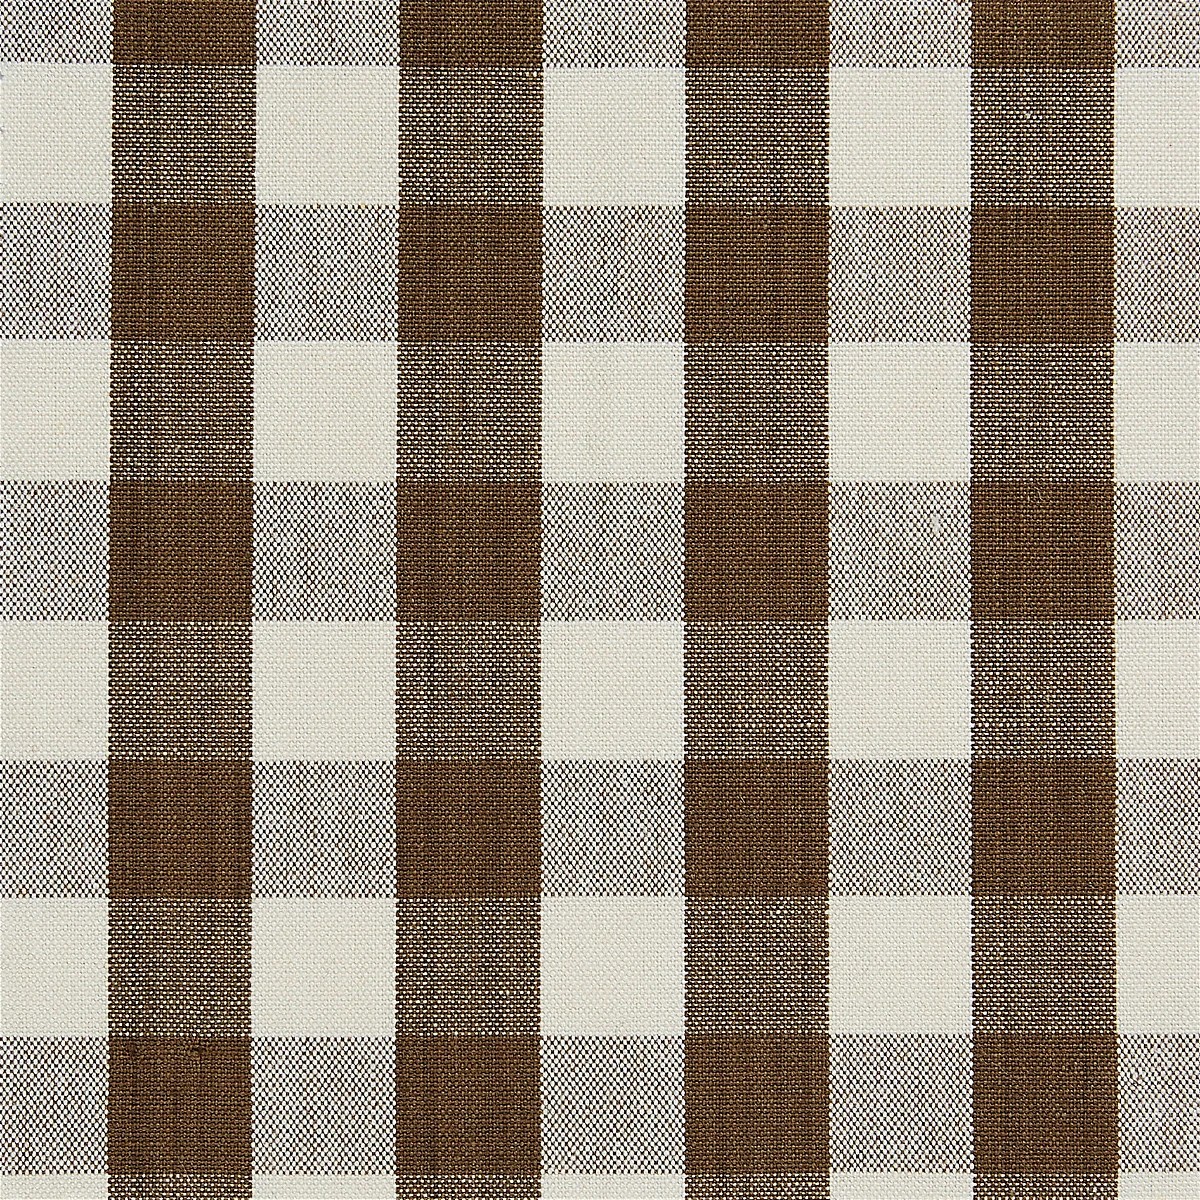 The image of an Elton Cotton Check Fabric product